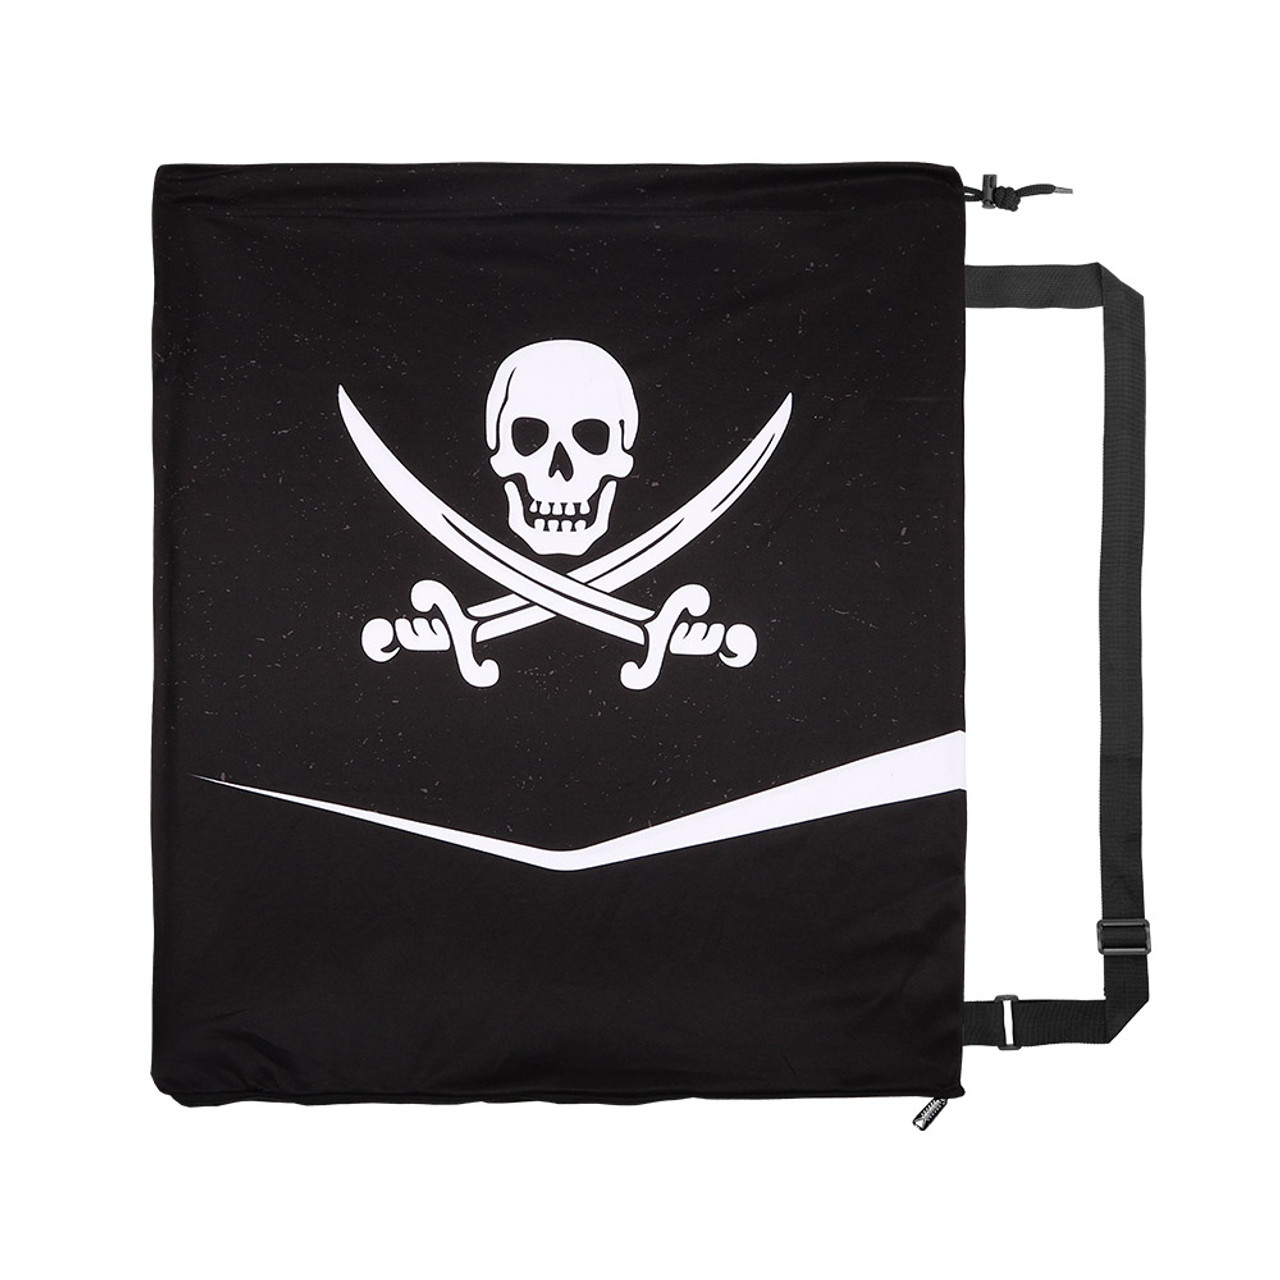 Awkward Styles Jolly Roger Skull Bag Jolly Roger Bag Pirate Crossbones Day of Dead Skull Accessories Gothic Gifts for He Dia de Los Muertos